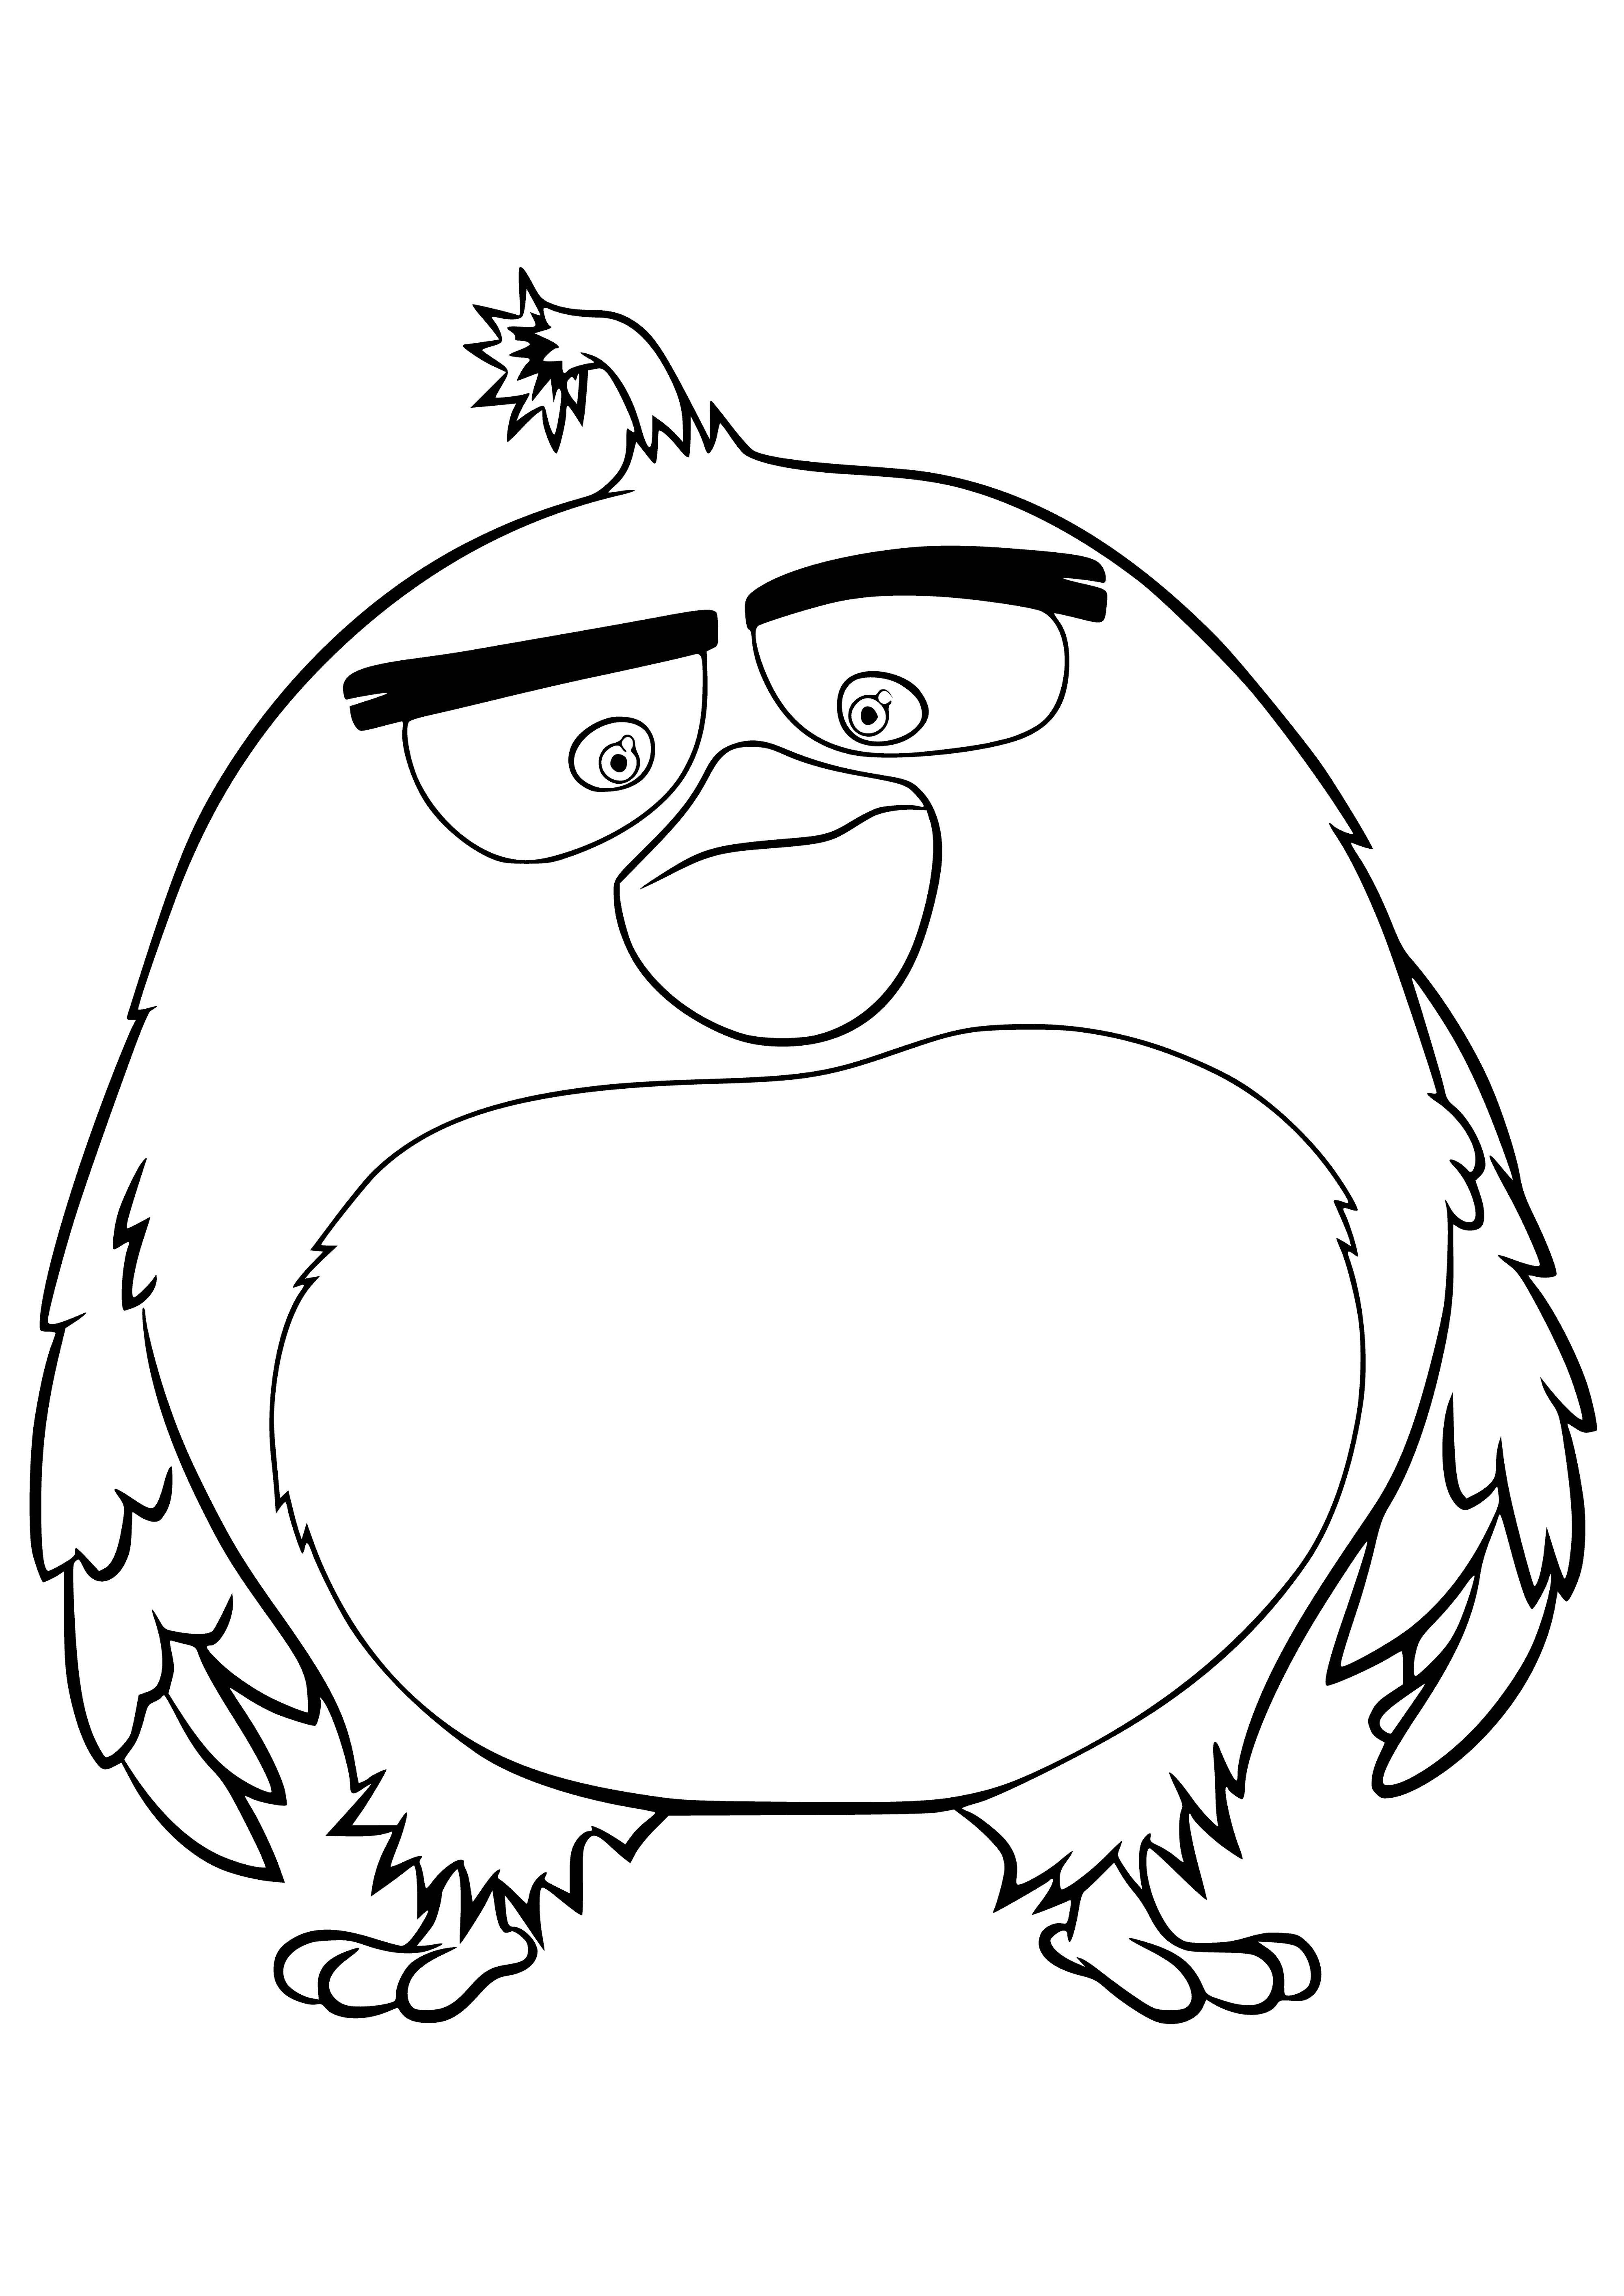 coloring page: A bird screams atop dynamite sticks, perched on a wall, as the fuse burns.